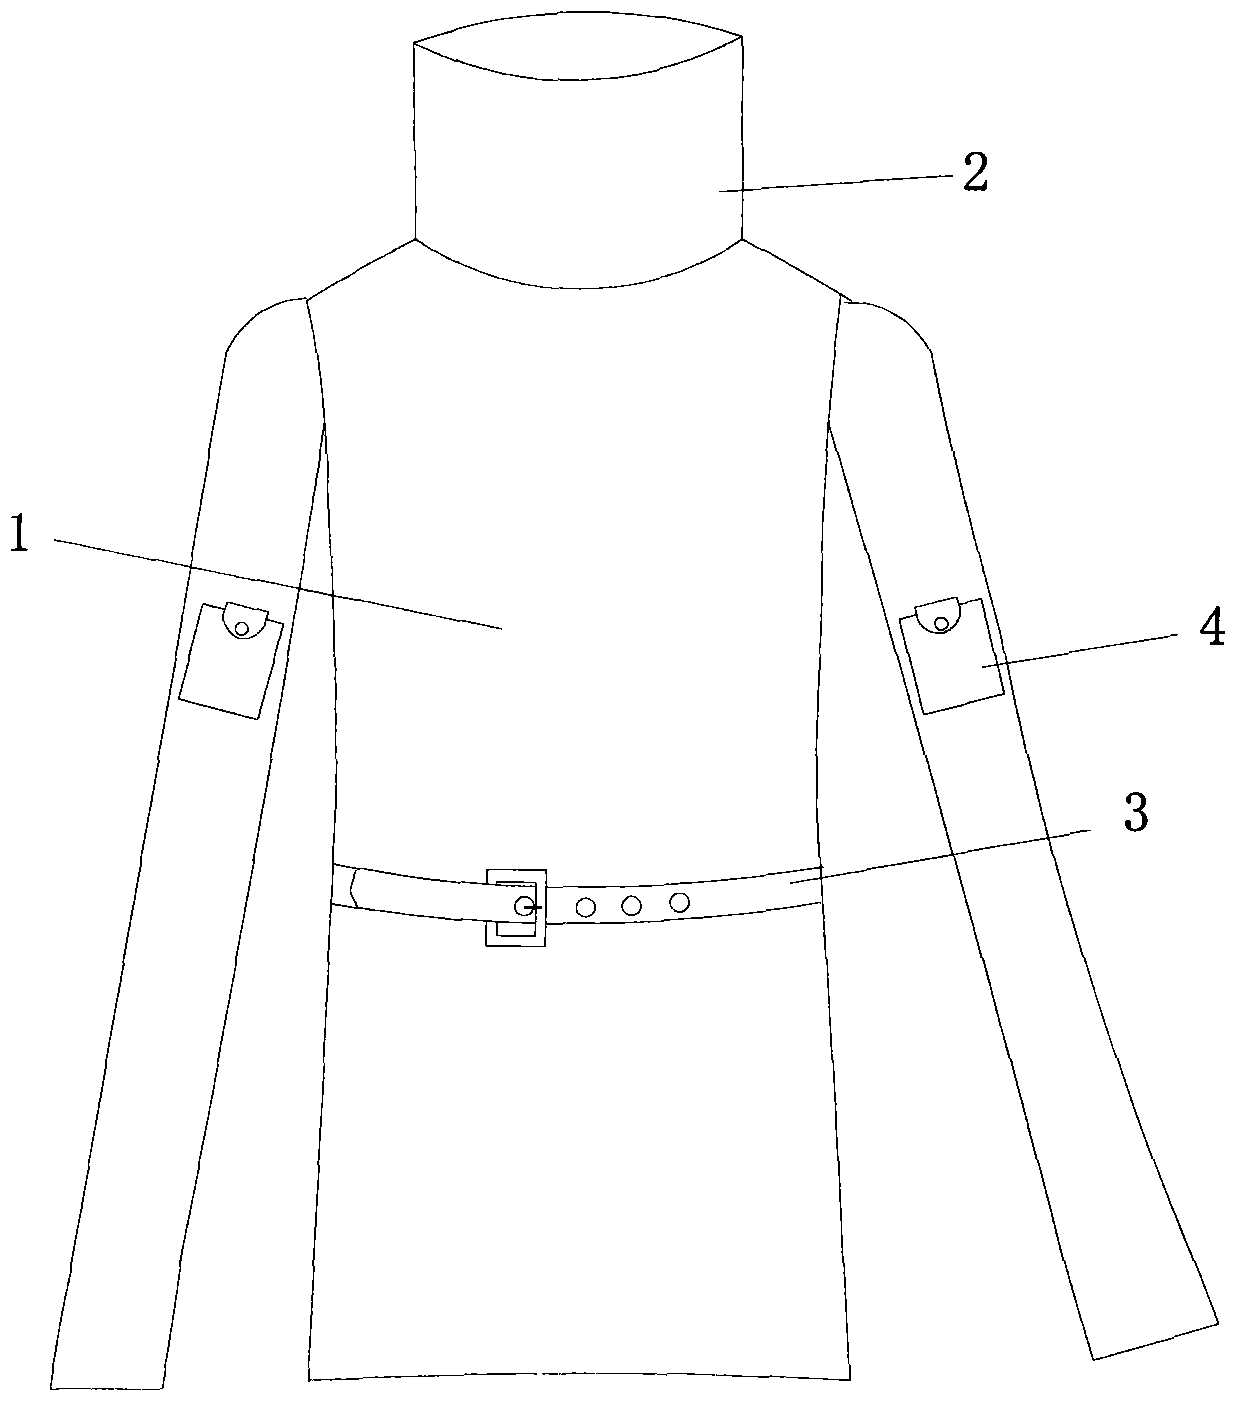 Light-transmitting and breathable garment with pockets on sleeves